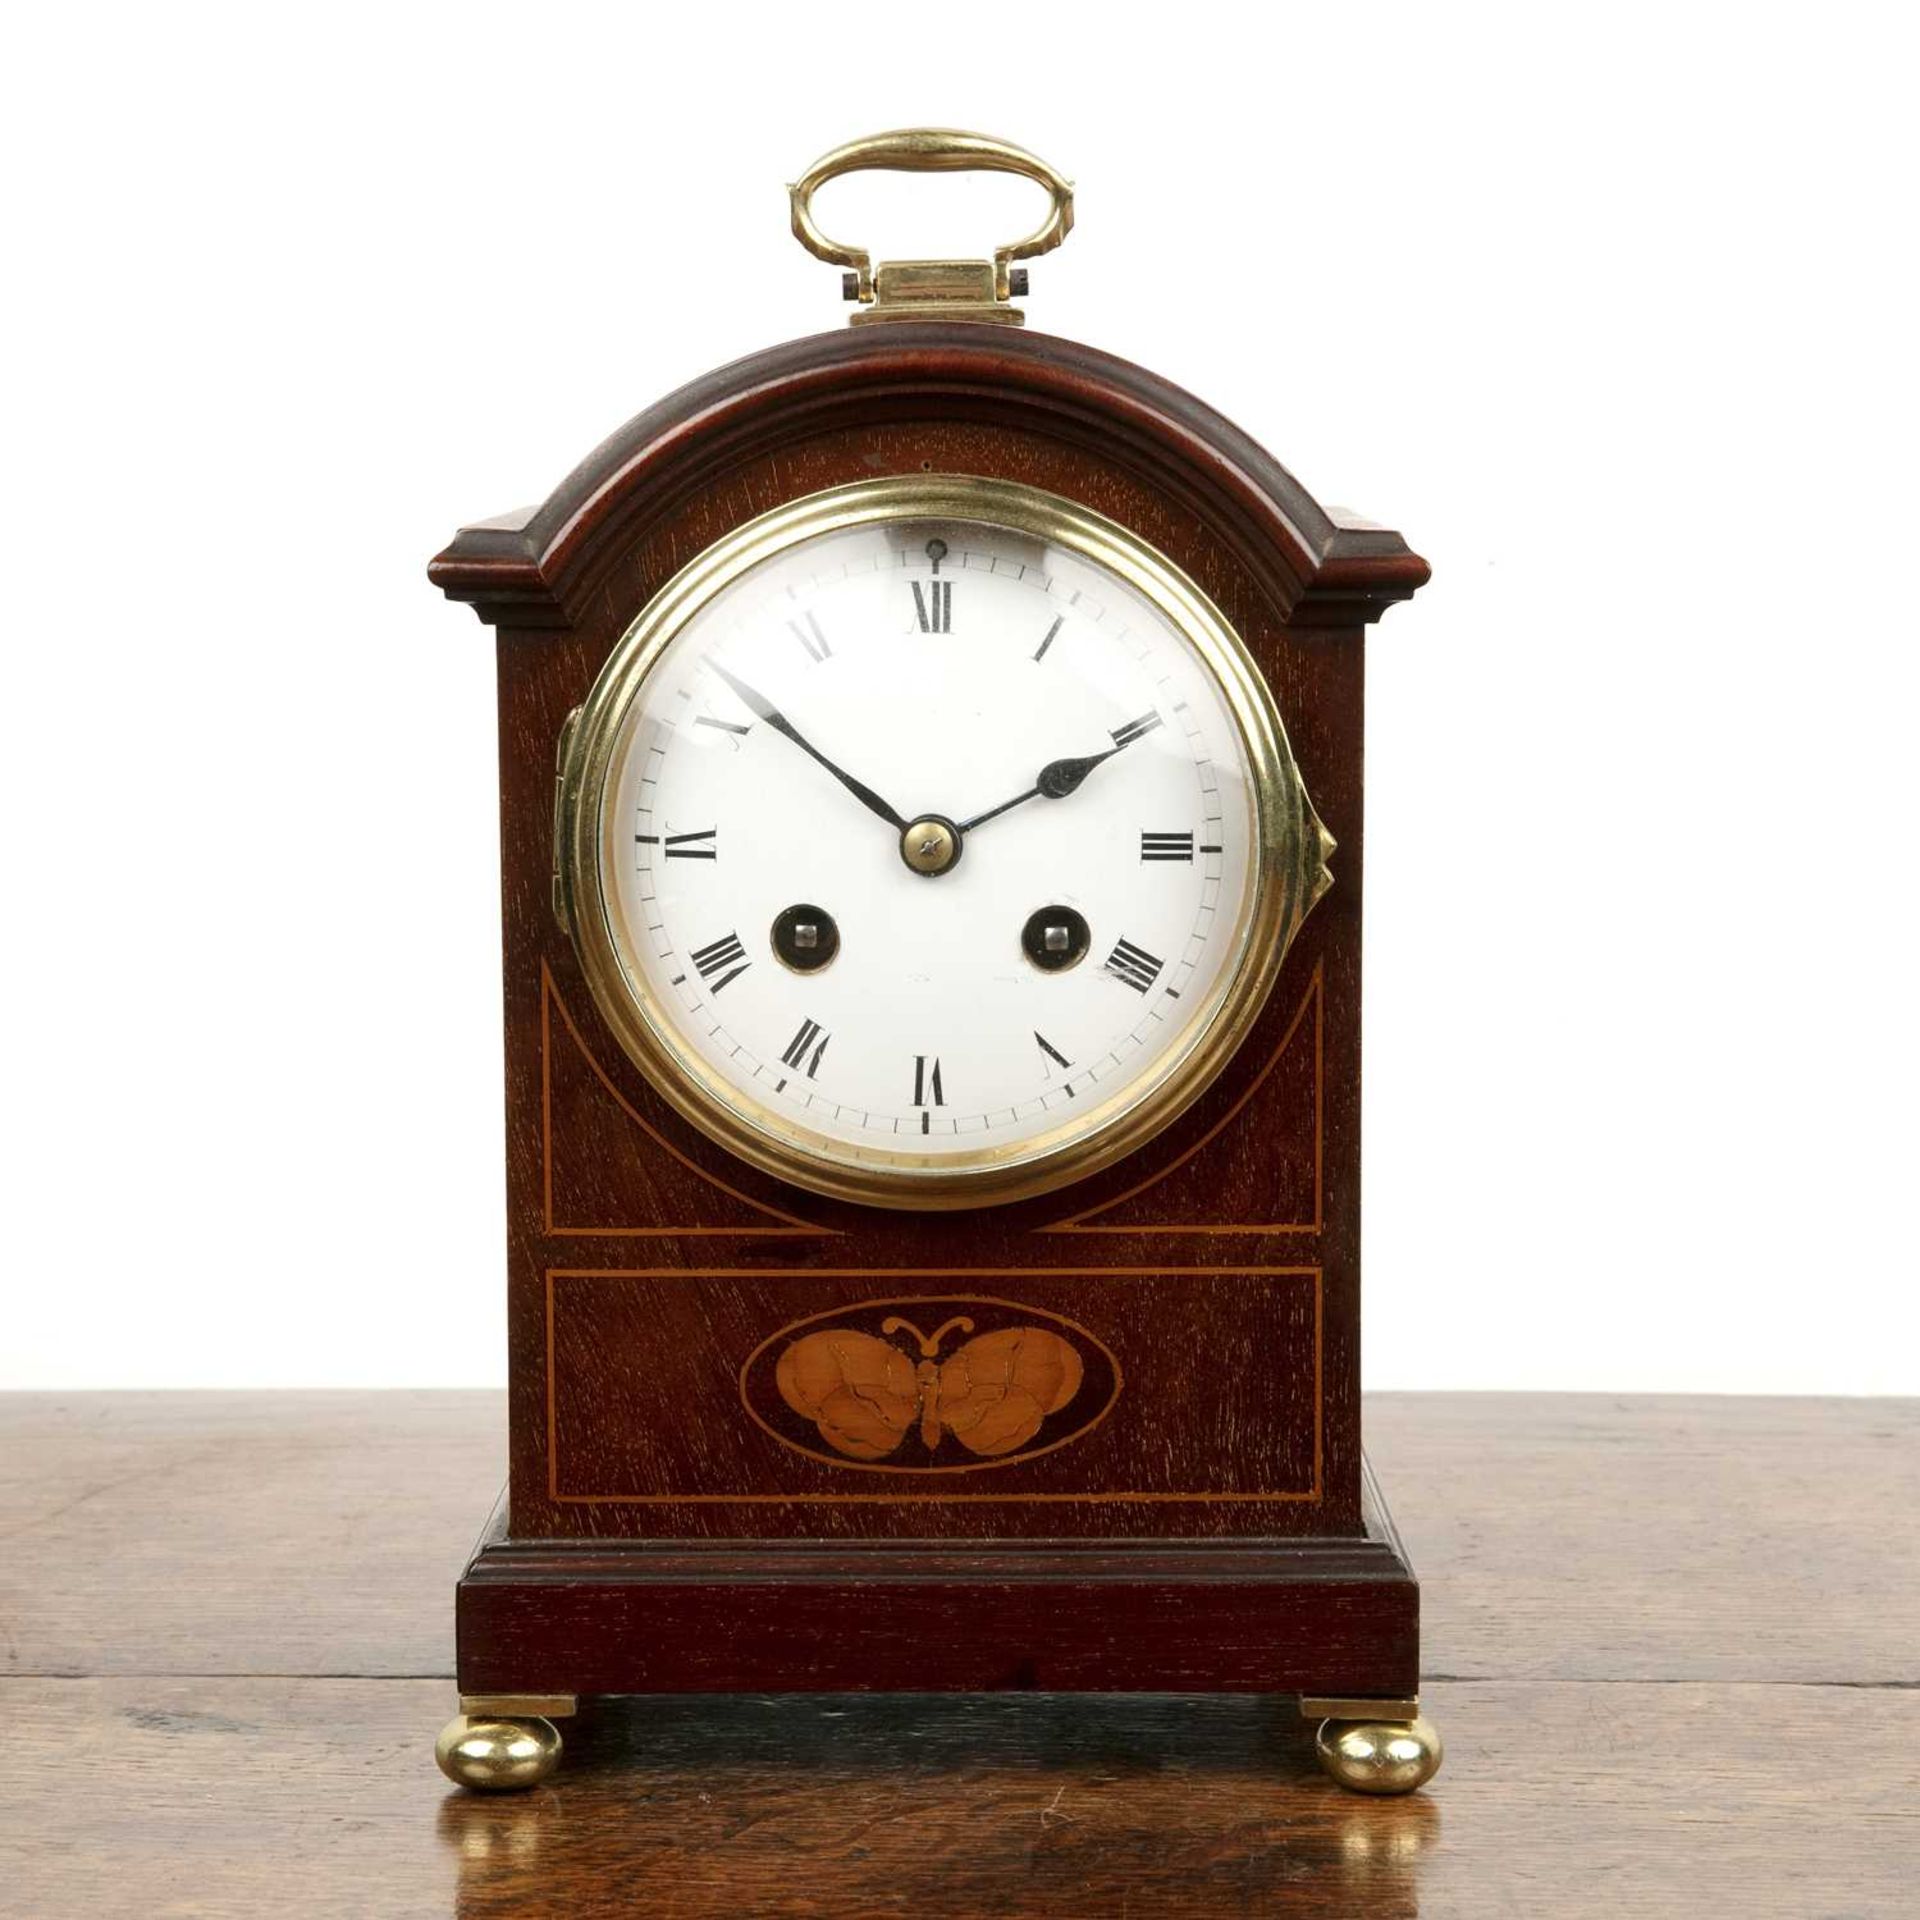 Mahogany and inlaid mantel clock Edwardian, with a striking movement, 25cm high Provenance: The